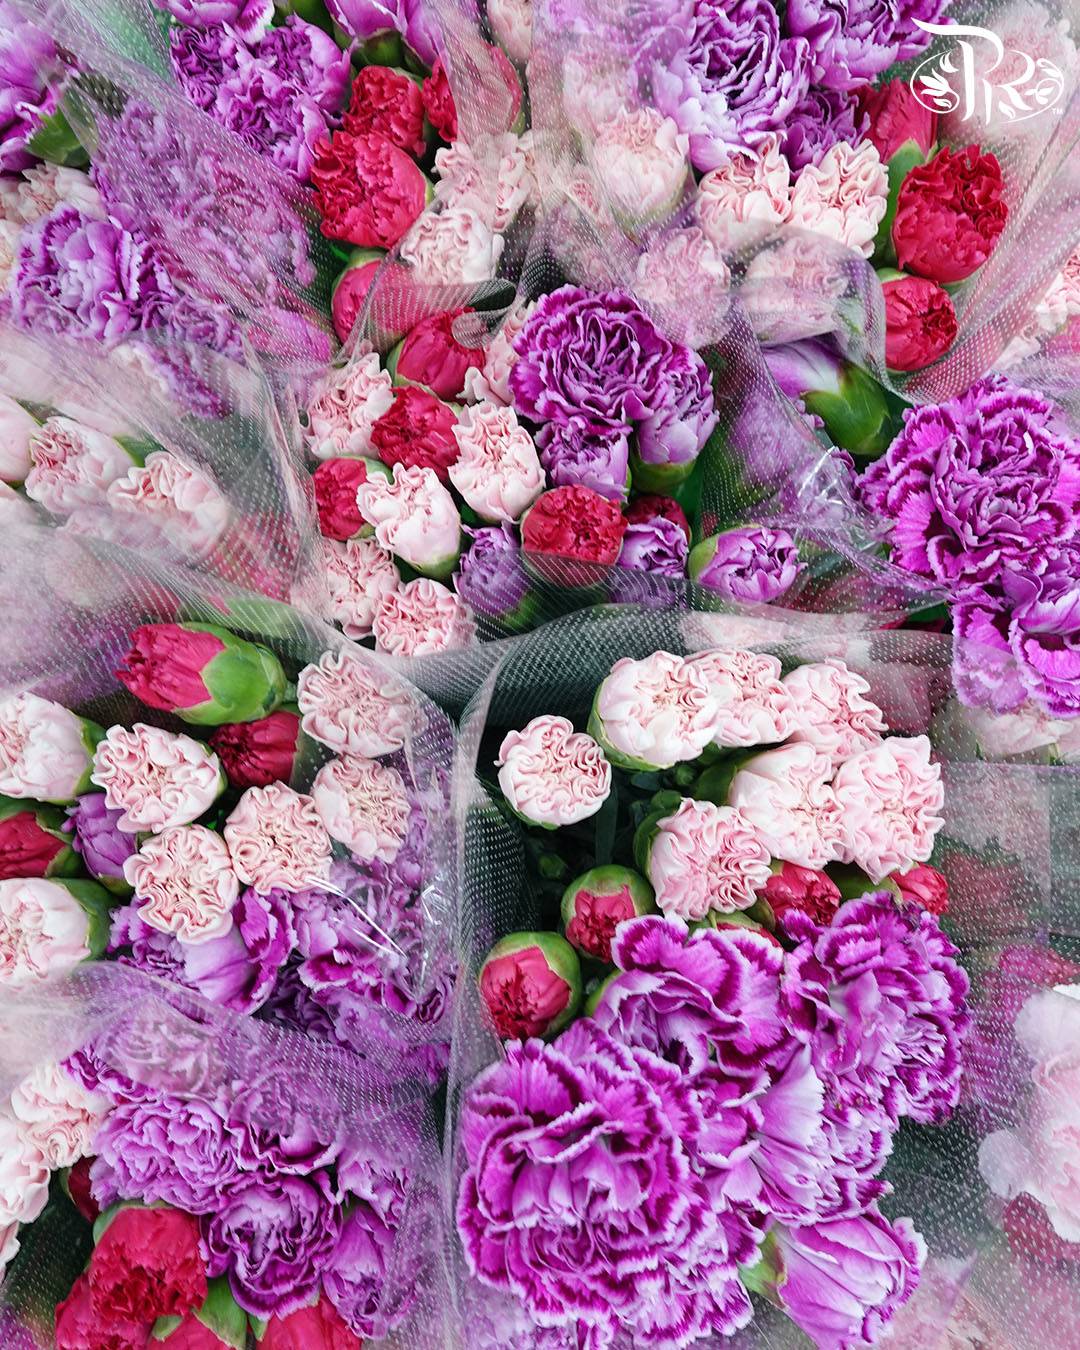 Limited Mixed Carnations - Pudu Ria Florist Southern